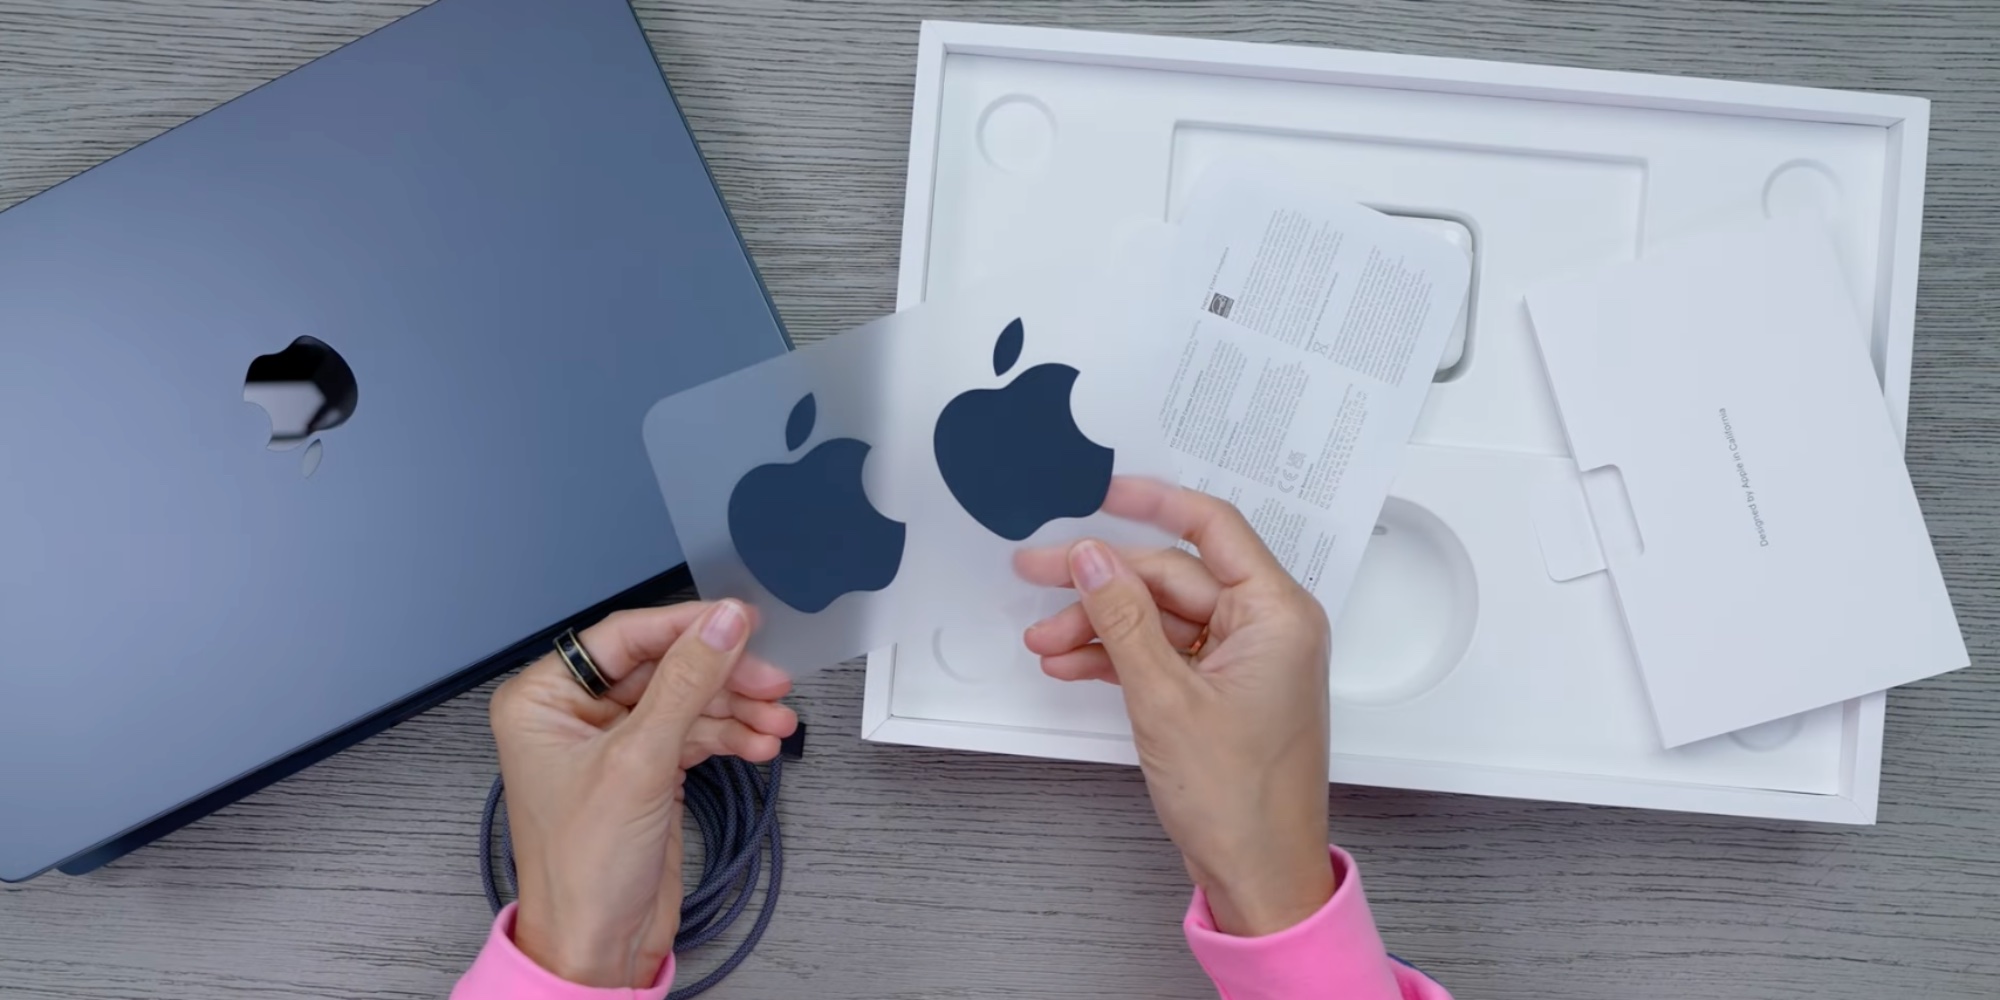 M2 MacBook Air comes with matching Apple stickers - 9to5Mac